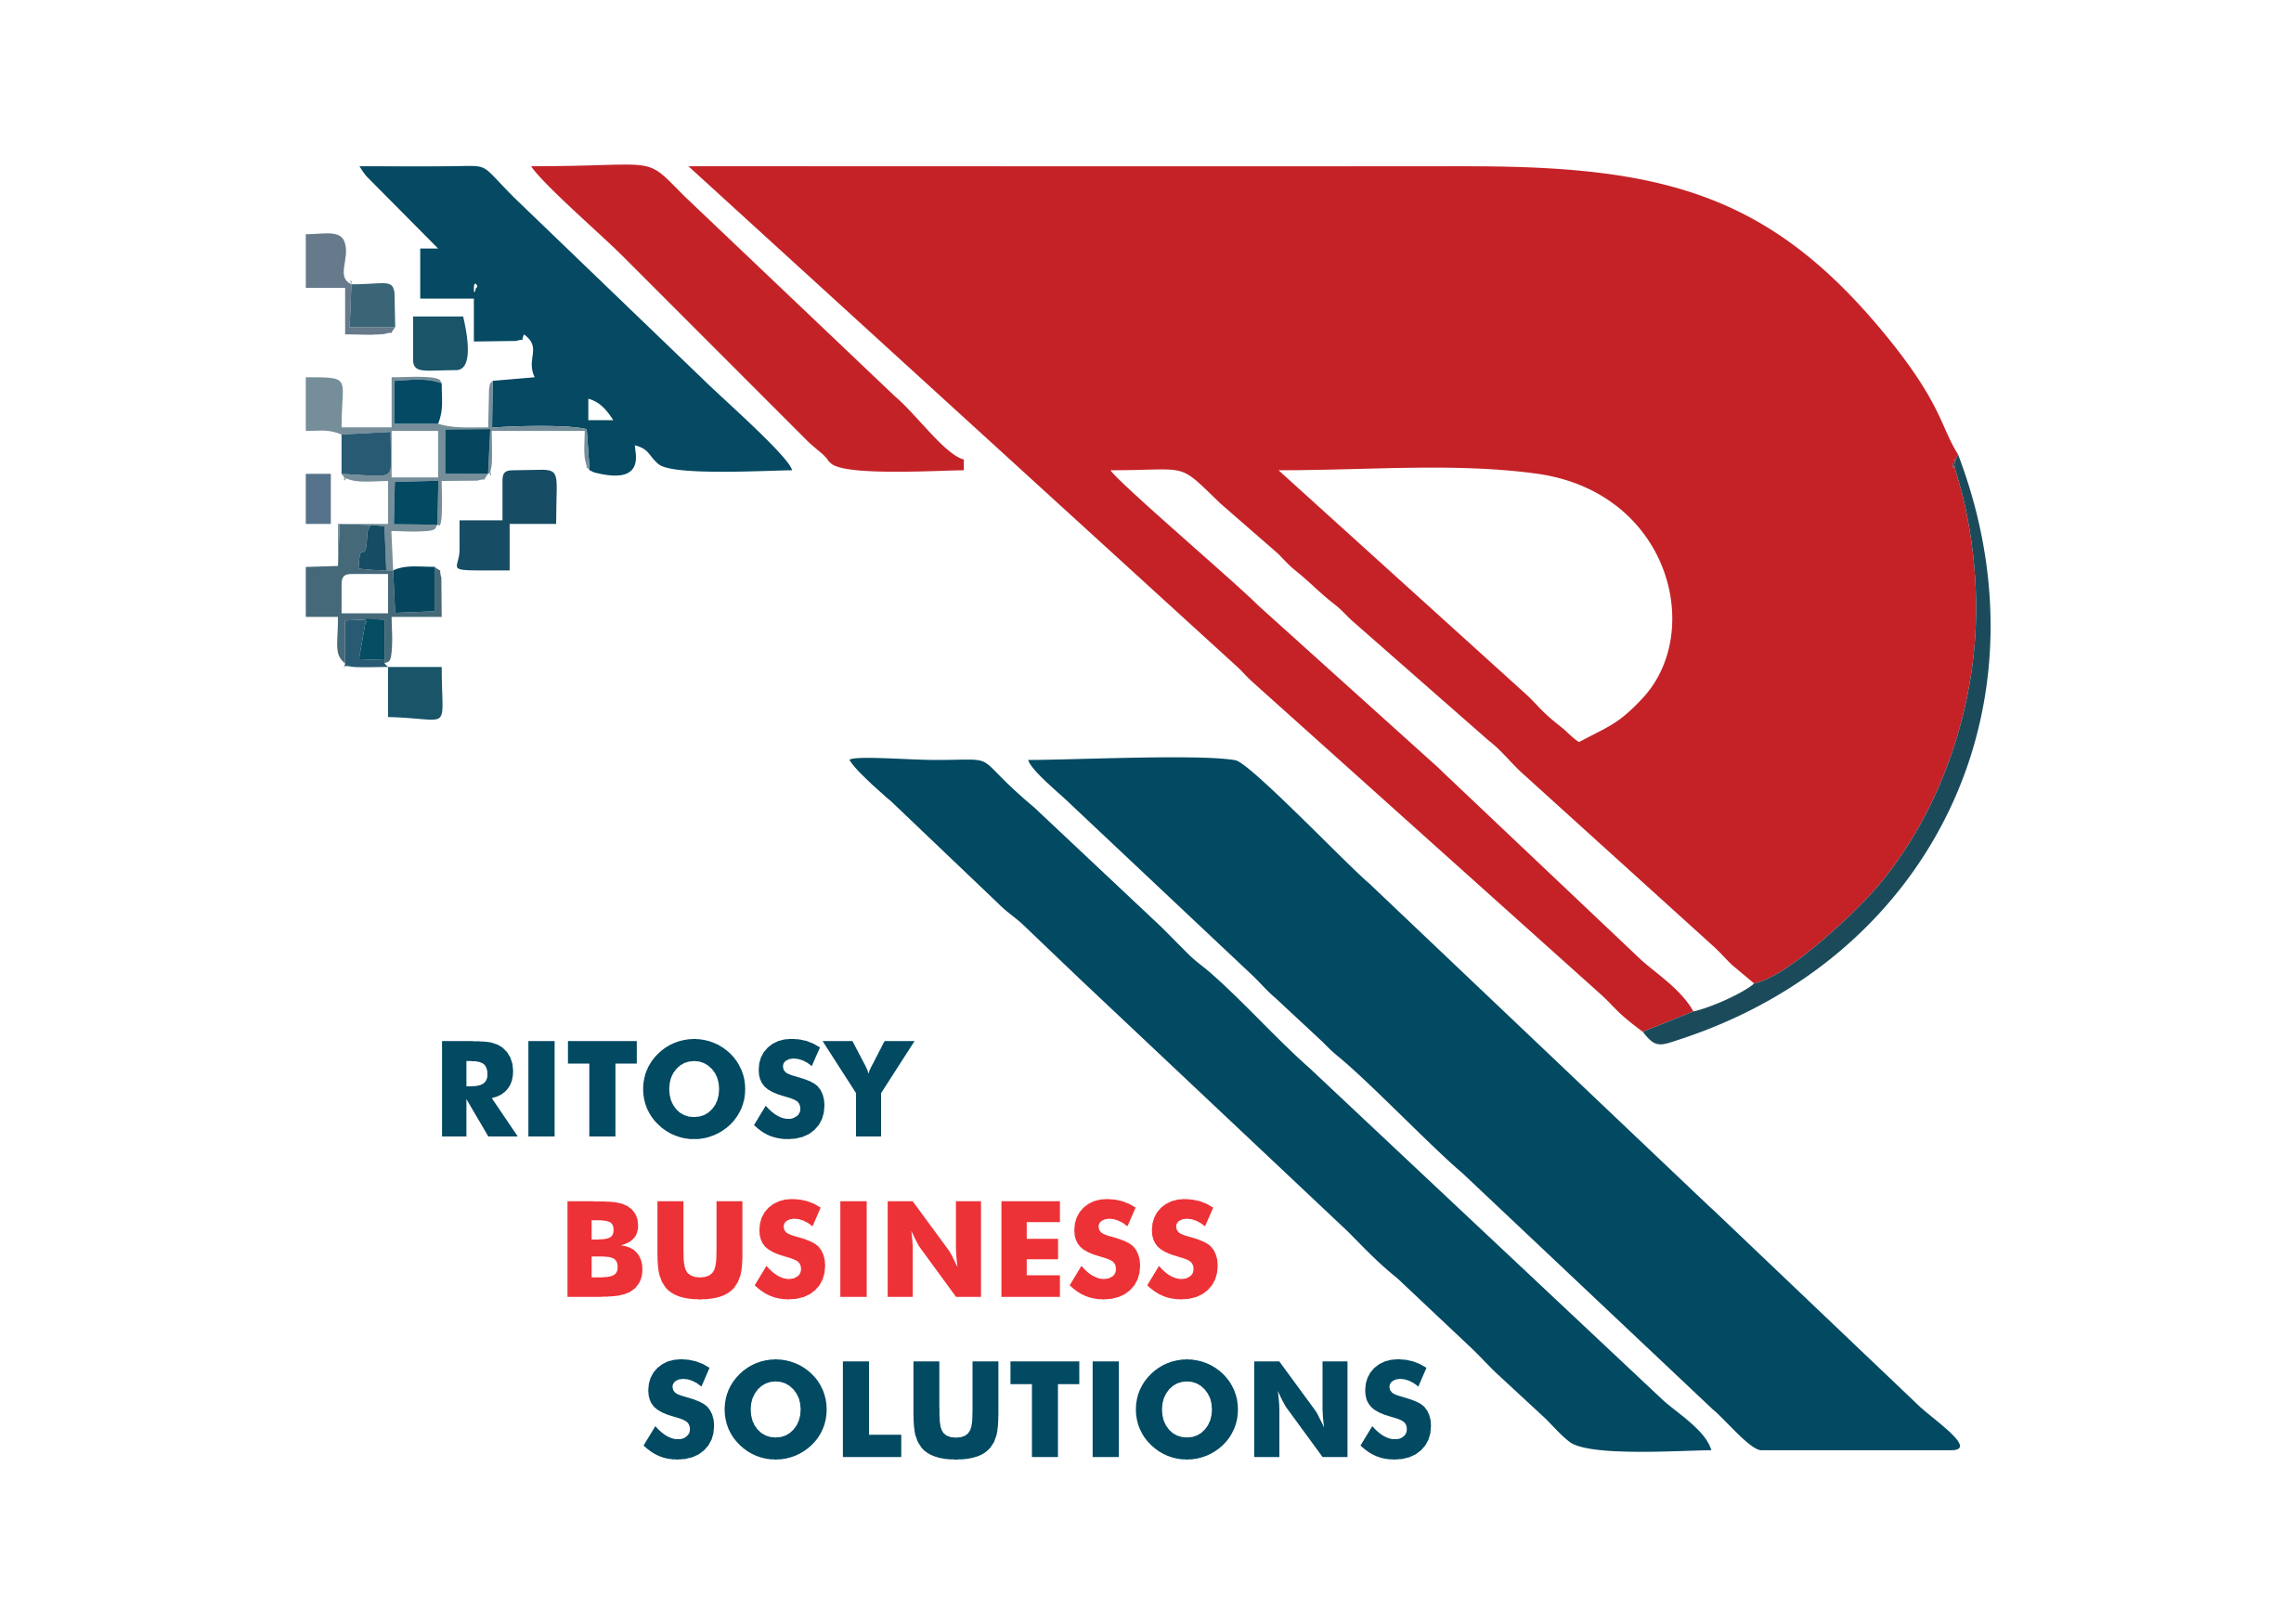 Ritosy Business Solutions